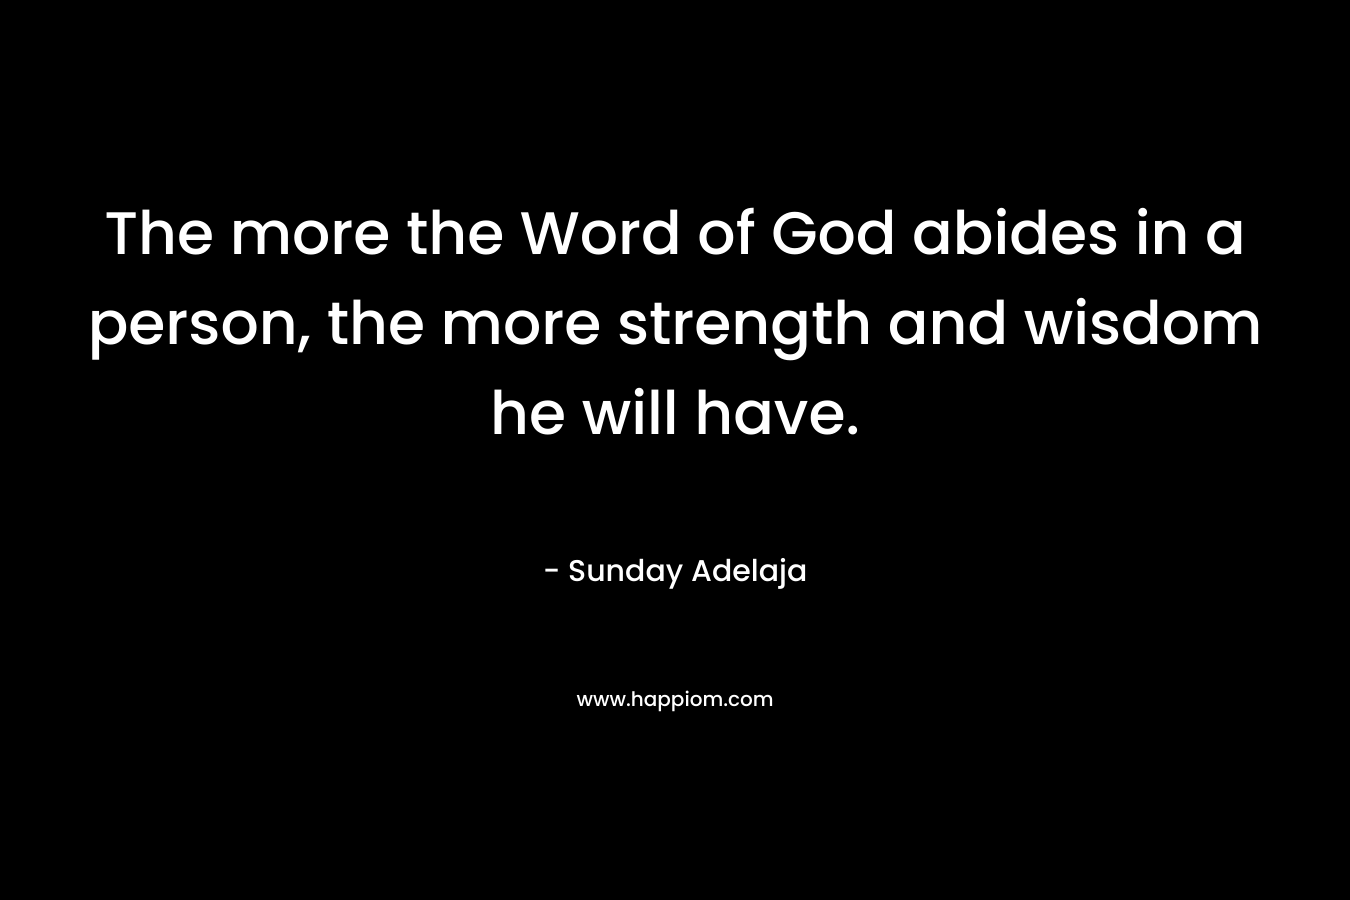 The more the Word of God abides in a person, the more strength and wisdom he will have.